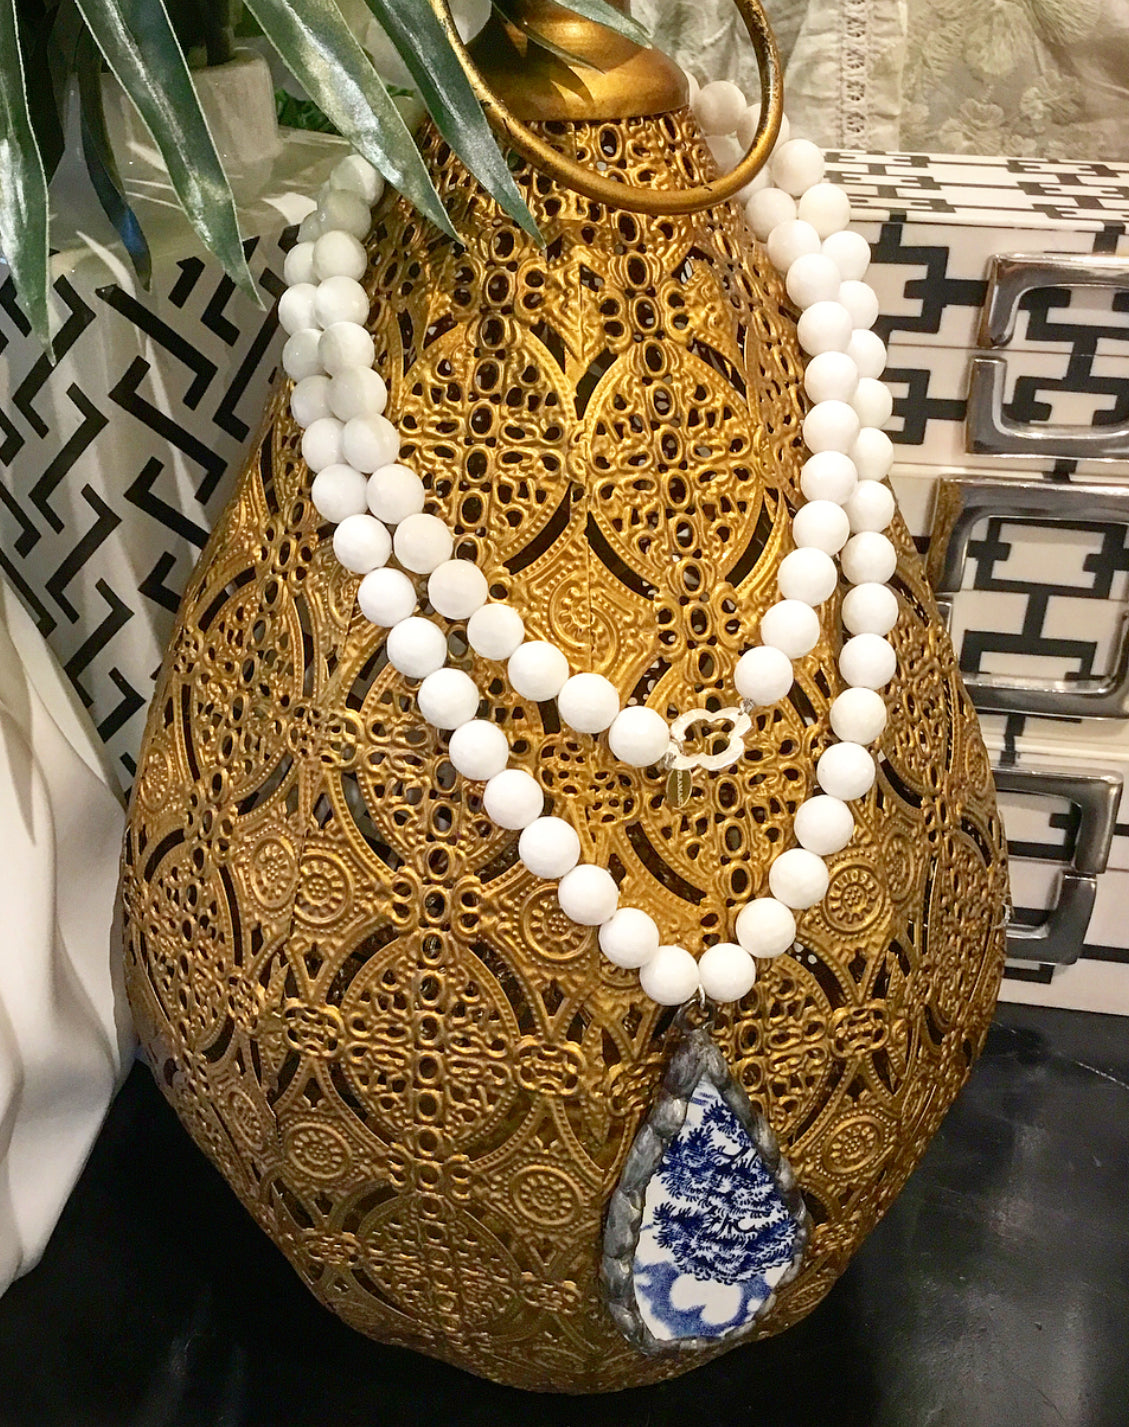 "Want It" Wednesday: Gorgeous & New, Handmade Designer Teramasu White Agate Necklace with One-of-a-Kind Blue & White Porcelain Pendant